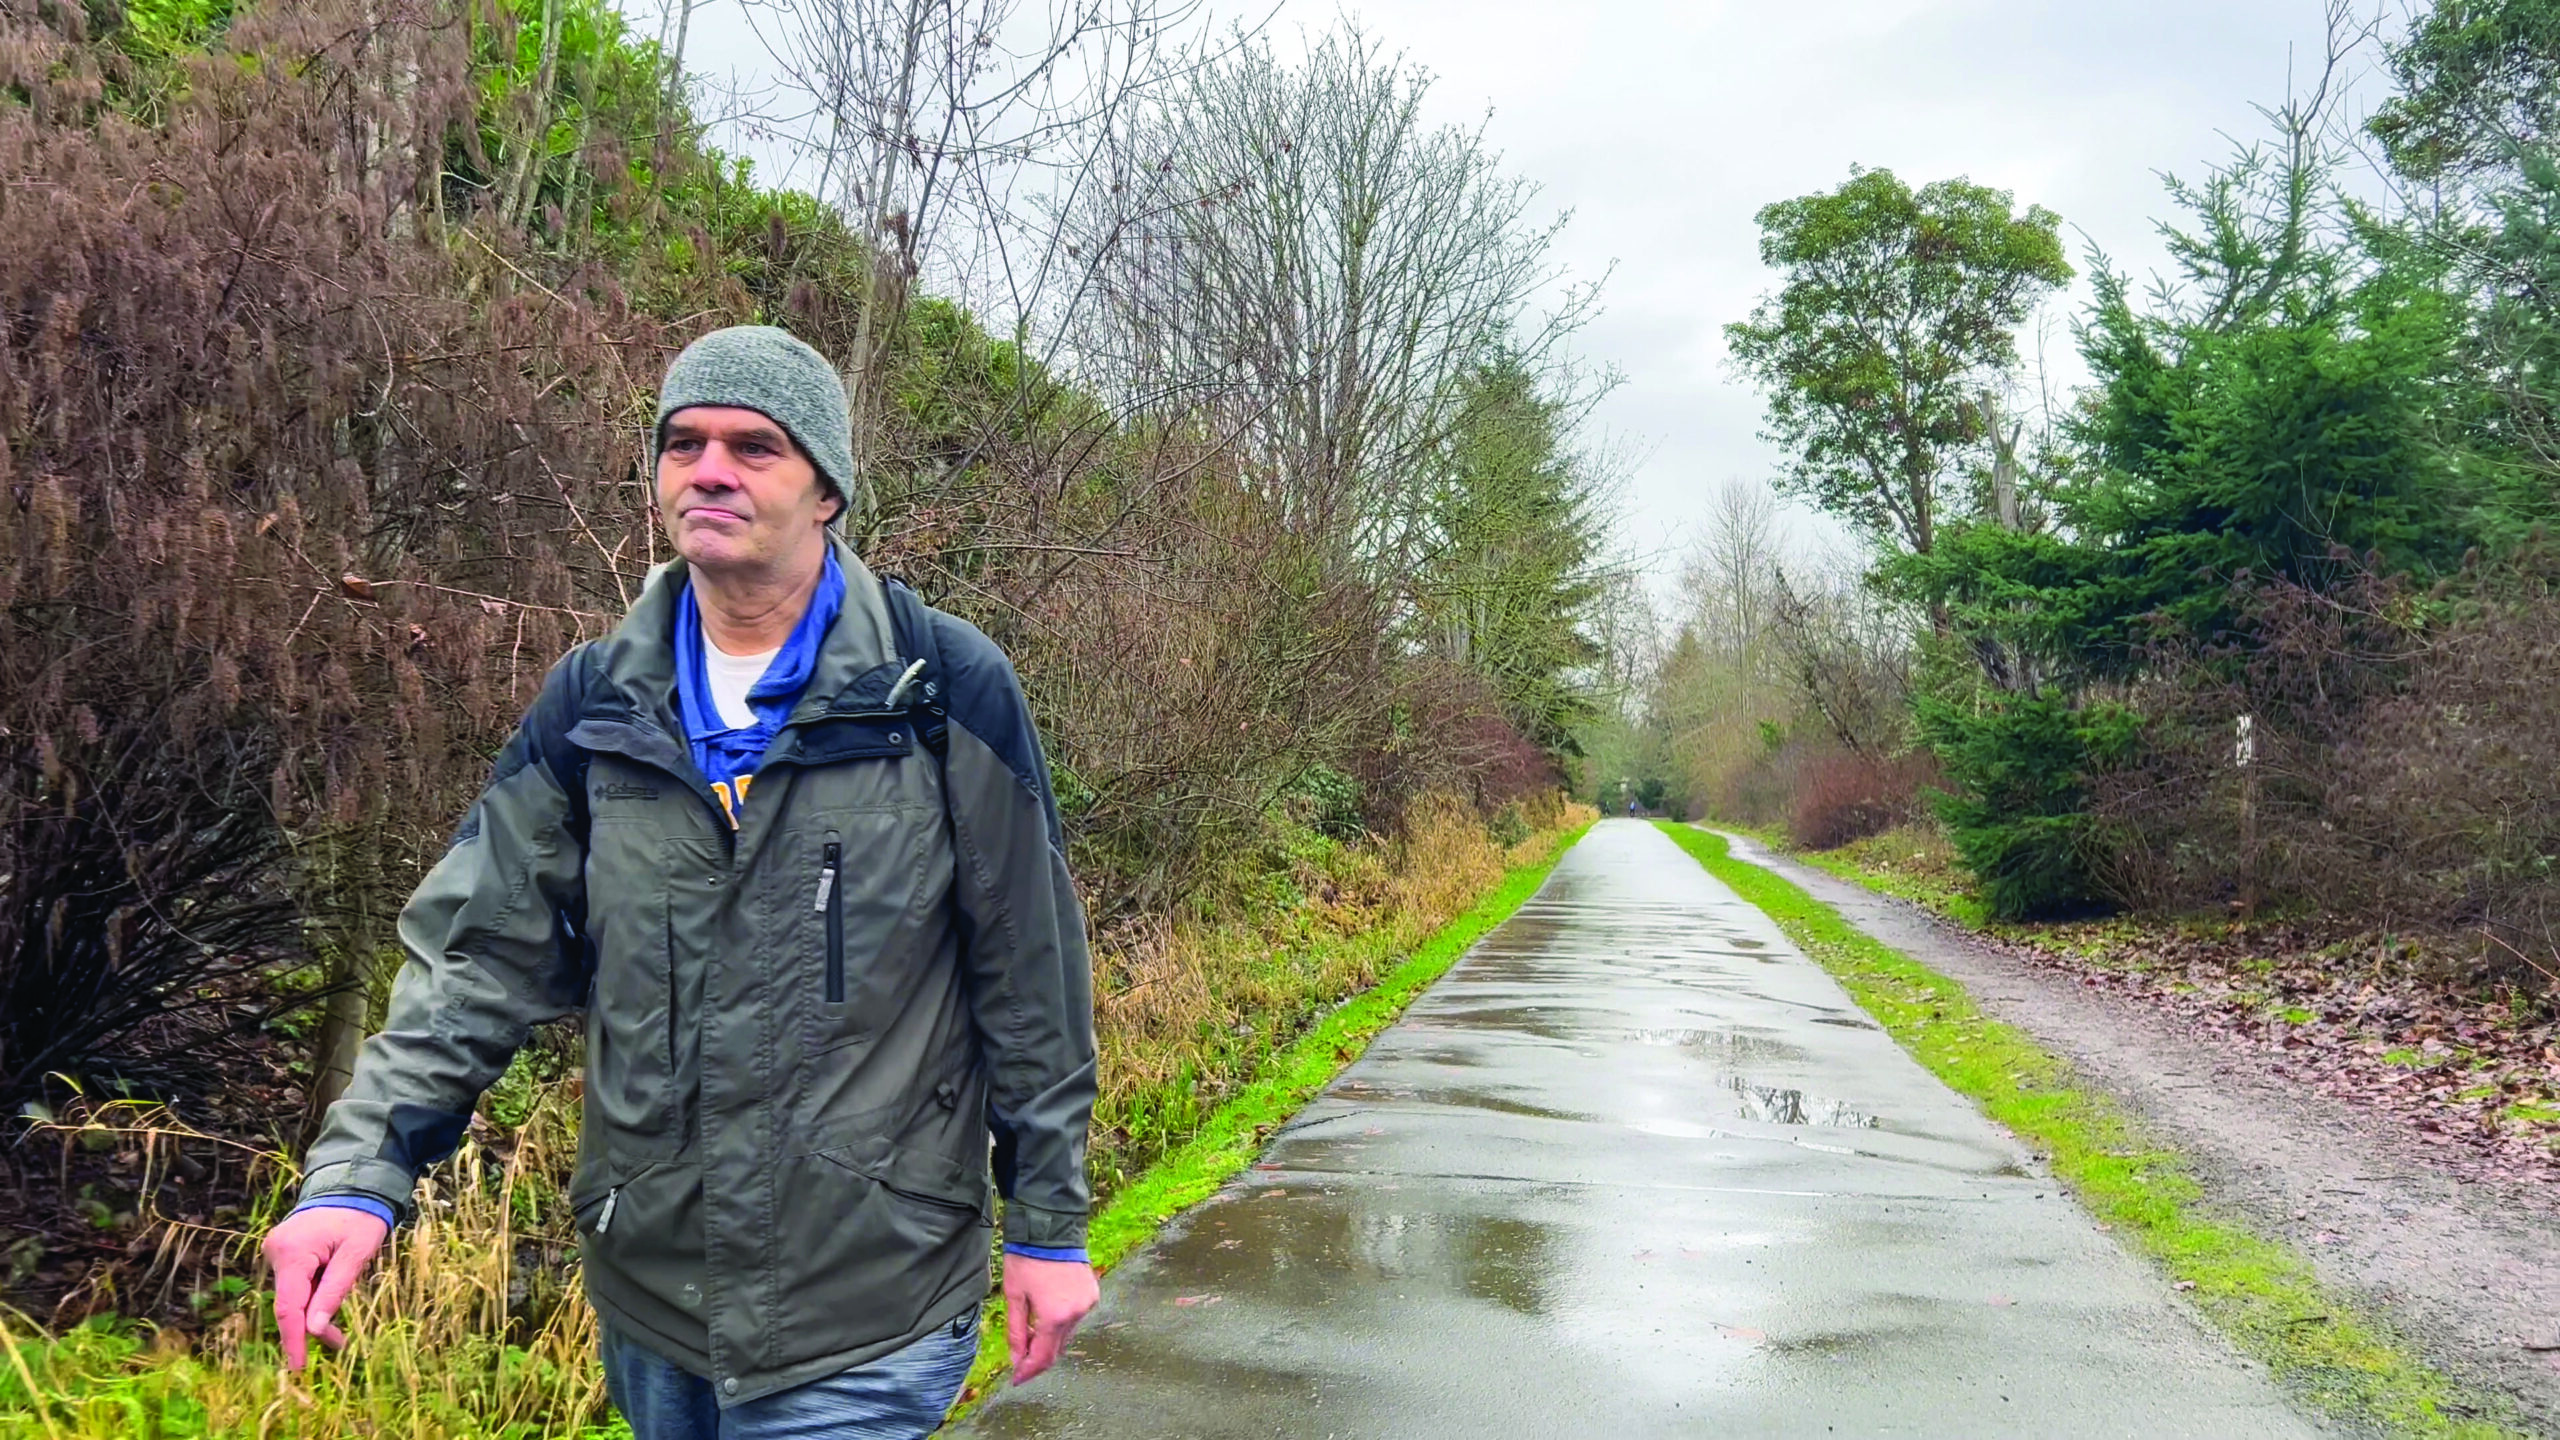 A man wearing a light grey hat, dark grey rain jacket, and jeans, strolls down a paved path wet with rain.